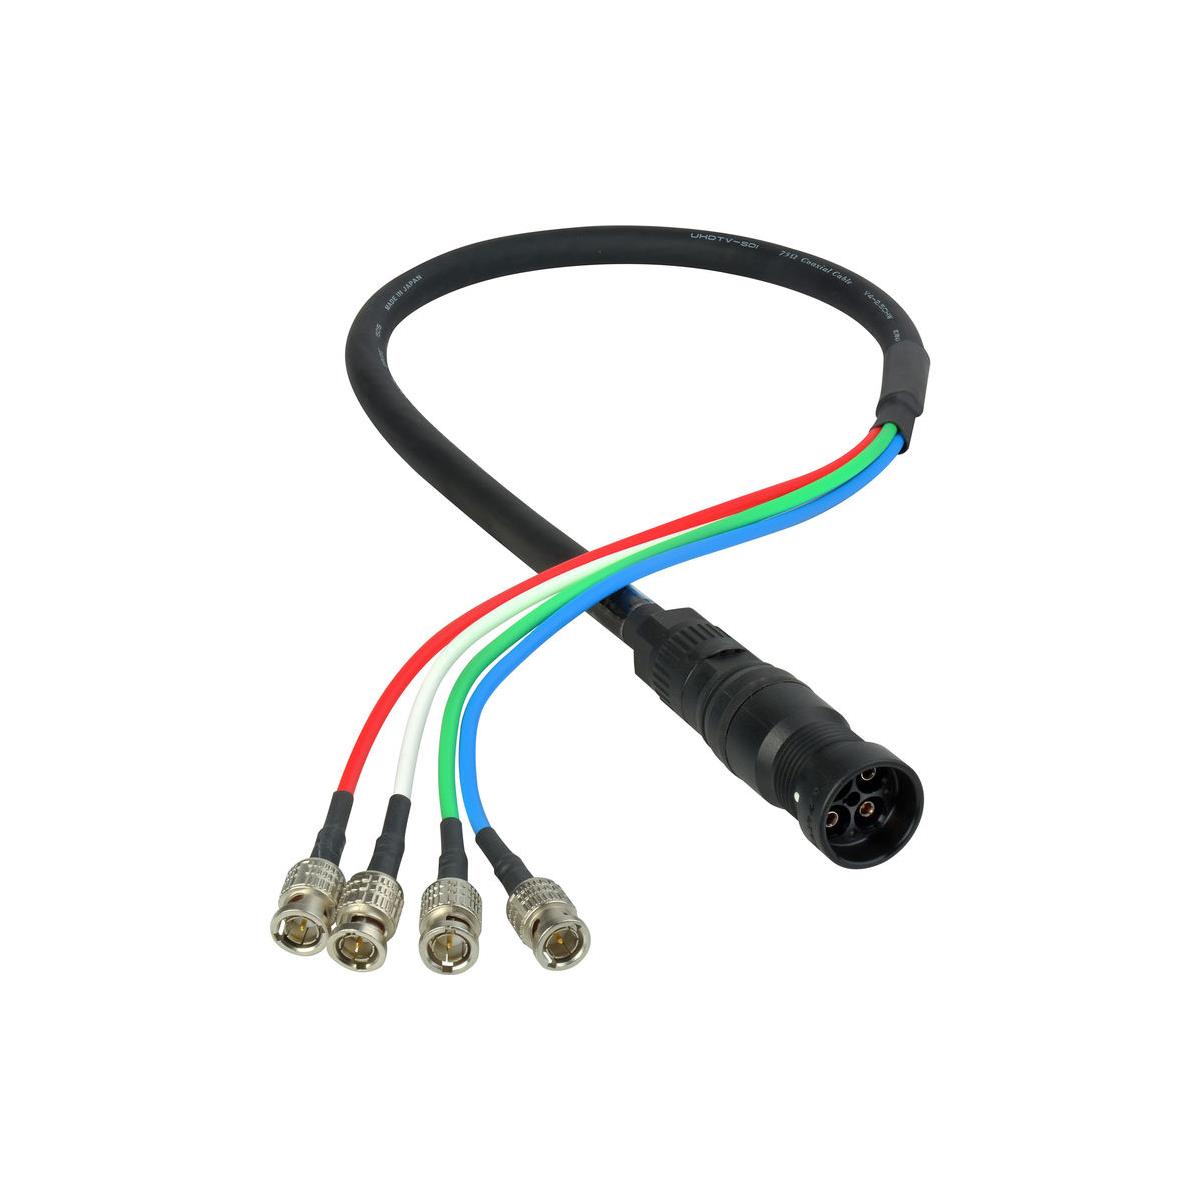 Laird 50' 4K UHD 3G HD-SDI 4-Channel DIN Female to BNC Camera Breakout Cable <b> 4-3G HD-SDI Signal Channel Quick Connect System for 4K/UHD Video Formats </b>One step, quick-connect Laird coax Canare cable assemblies connect 4 channels of 3G HD-SDI signals for 4K/UHD video formats. The Laird cables are assembled with Canare 4 channel, V4-2.5CHW flexible coaxial cable, allowing a break out to 4 Canare BNC or 4 DIN connectors. The Canare male connector, MDM-V4C25HW is designed to mate with the MDF-V4JRU panel mount receptacle which features a 4 DIN pass-through on the back side to increase your connectivity but not your rack space. Laird 4K UHD Canare camera cables assemblies make quick work of keeping everything in line and organized. Available in a variety of lengths. Use with the Canare MDF-V4JRU 4K DIN 1.0/2.3 4-channel chassis mount connector.• Quick connect and disconnect• Multiple 3G-SDI signals to 4K/UHD formats• Canare cable with solid and lightweight nylon resin body• Push-pull locking Canare coax connectors with protective rubber boots• High performance Canare BCP-B25HW BNC or 4 DCP-C25HD DIN connectors• Made in the USA in a Canare trained fiber shop• Canare V4-2.5CHW 4-Channel 4K 75Ohms Coaxial Cable• 4 DIN 1.0/2.3 connectors• MDF-V4JRU accepts MDM-V4C25HW and also DIN 1.0/2.3 plugs<b> Applications </b>• High density 3G-SDI• applications• Mobile trucks• Fly packs• Studios• 4K transmission• Consolidate HD-SDI lines